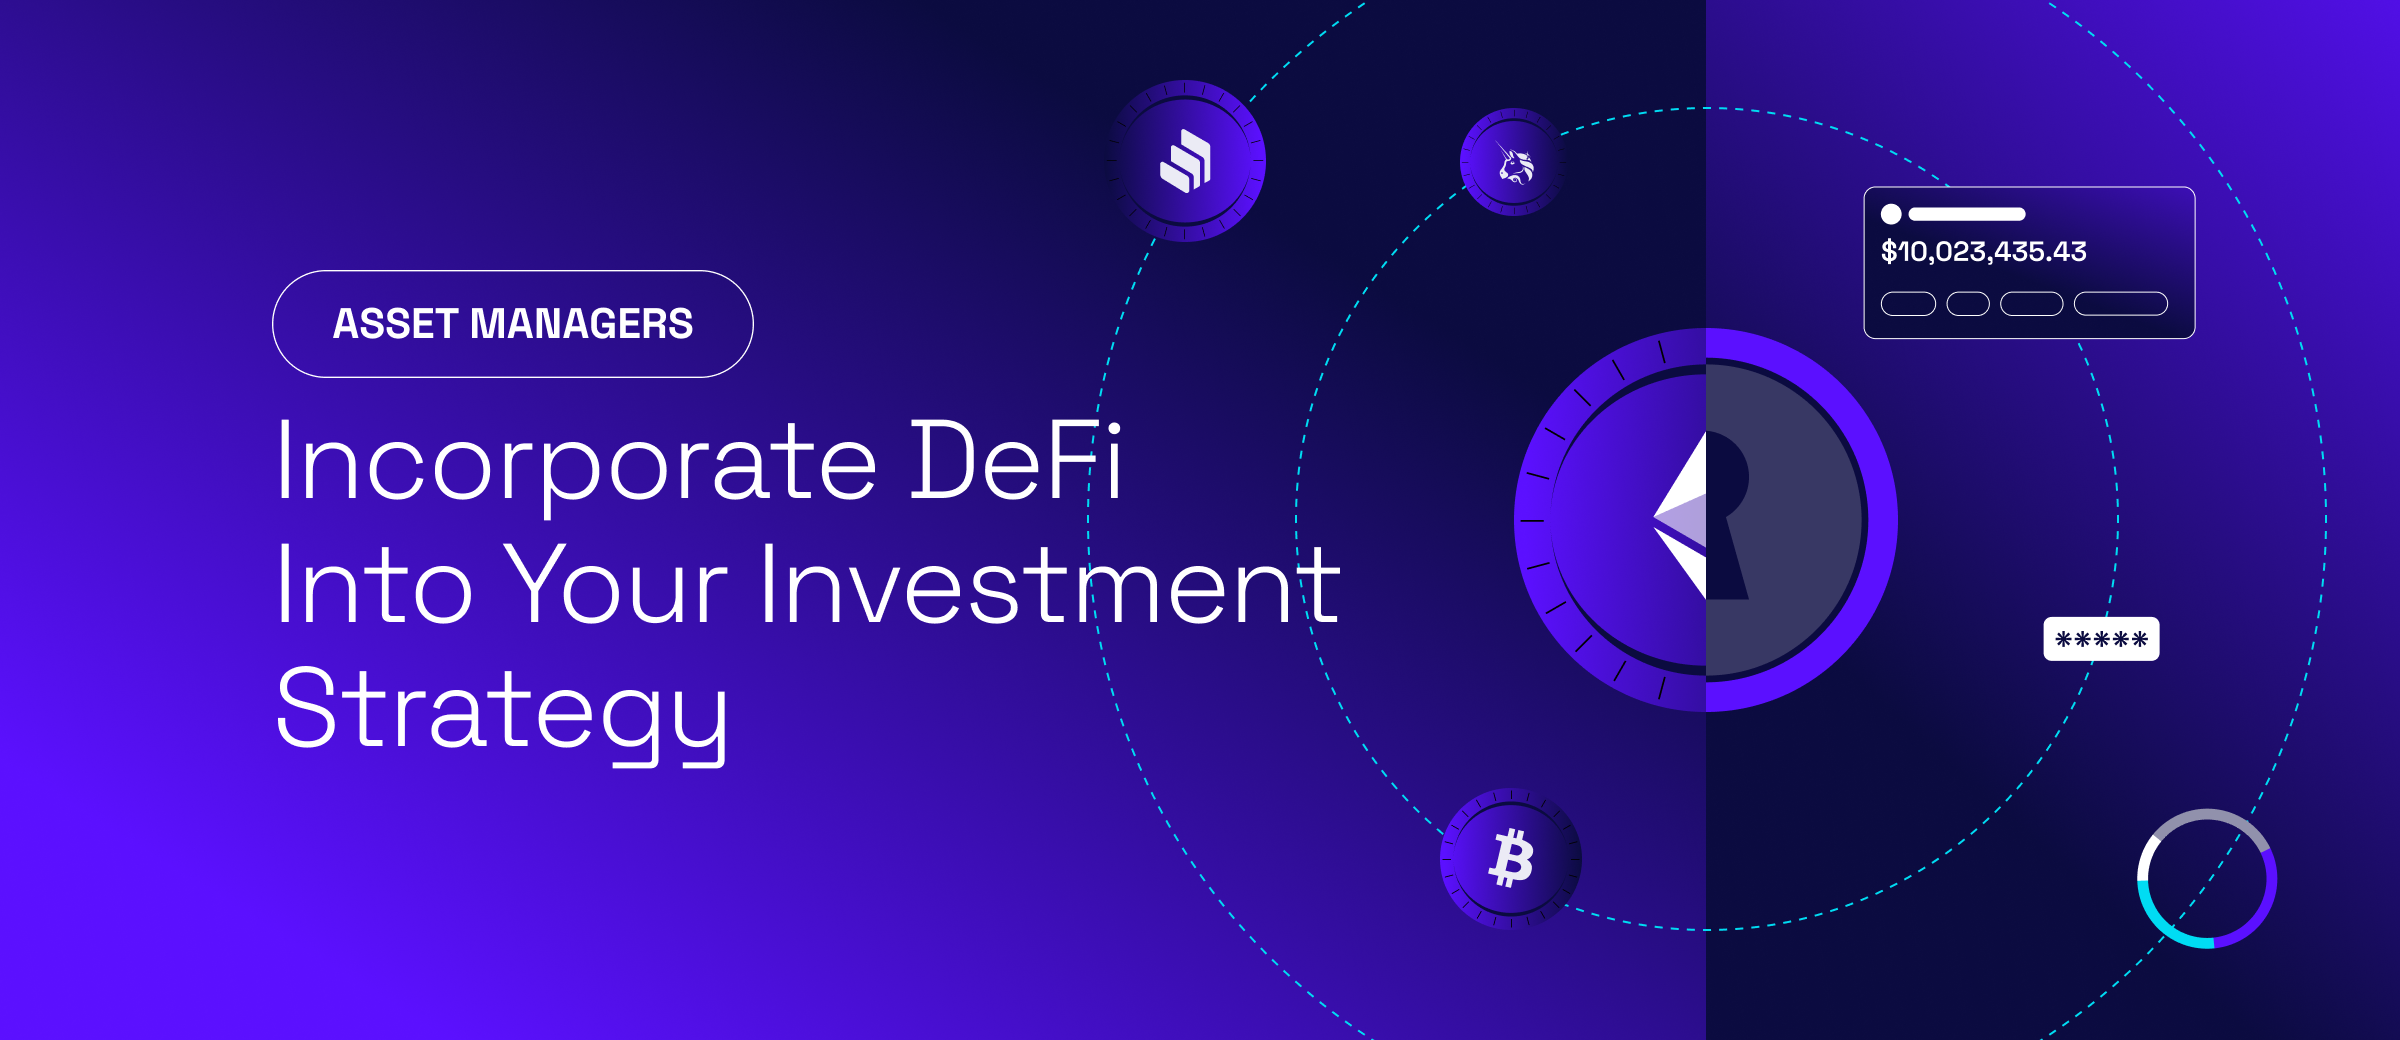 How to Incorporate DeFi into Your Asset Management Strategy